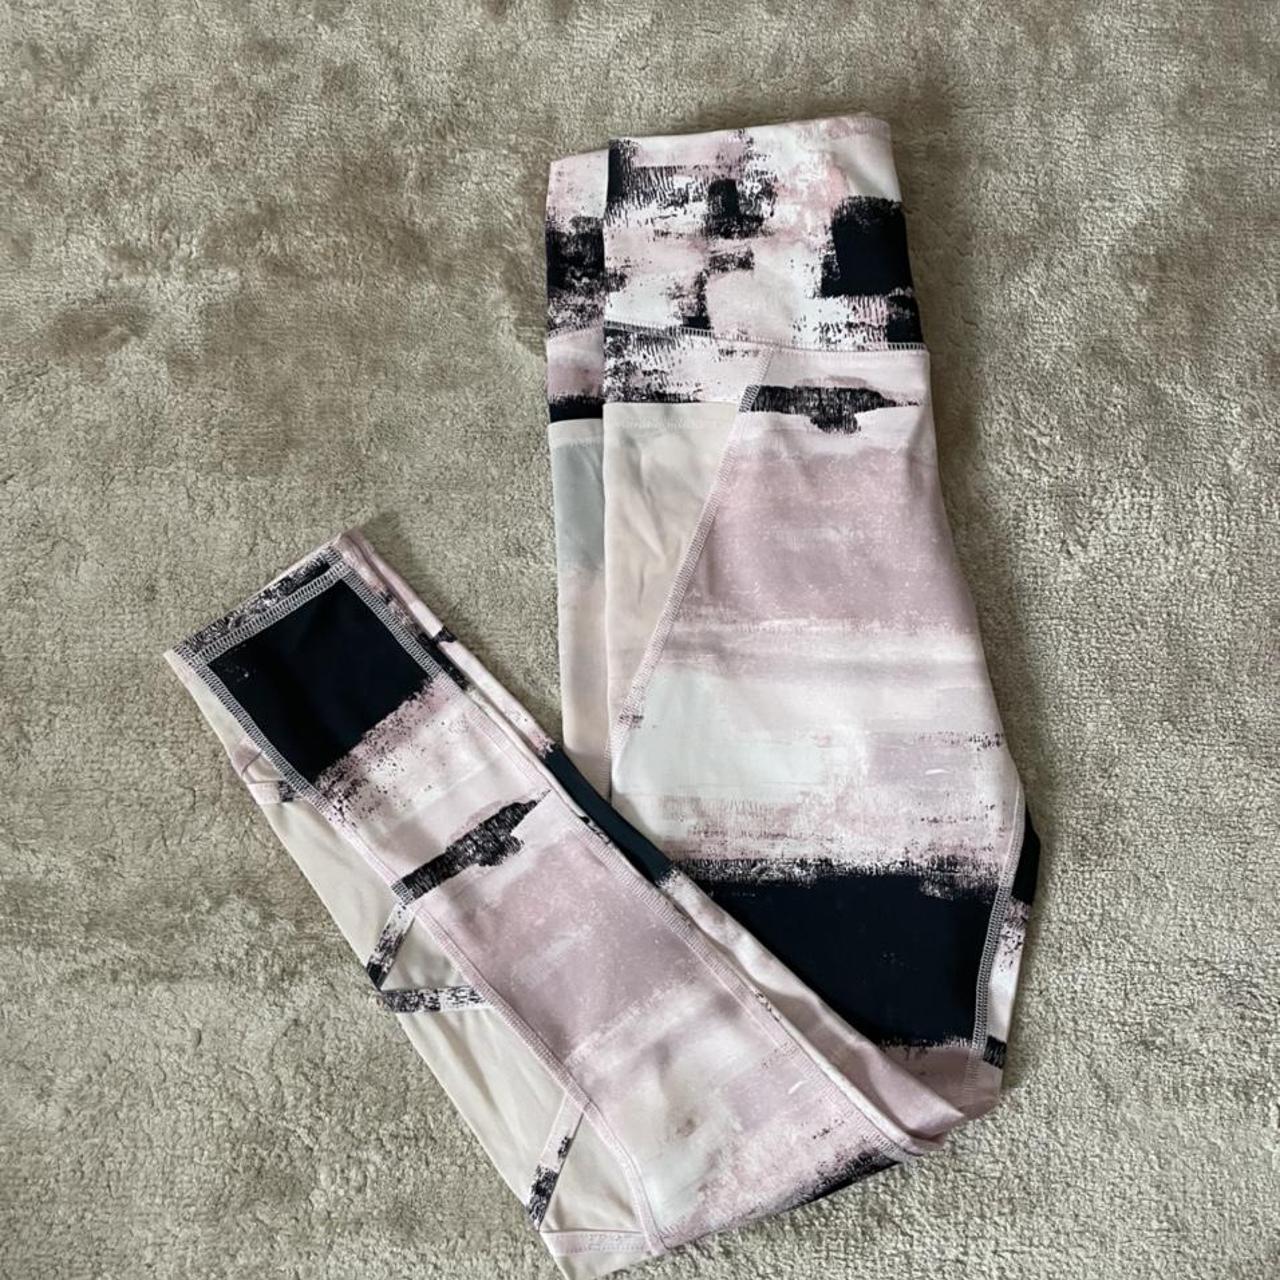 Black Athletic Works Leggings! They have an exposed - Depop